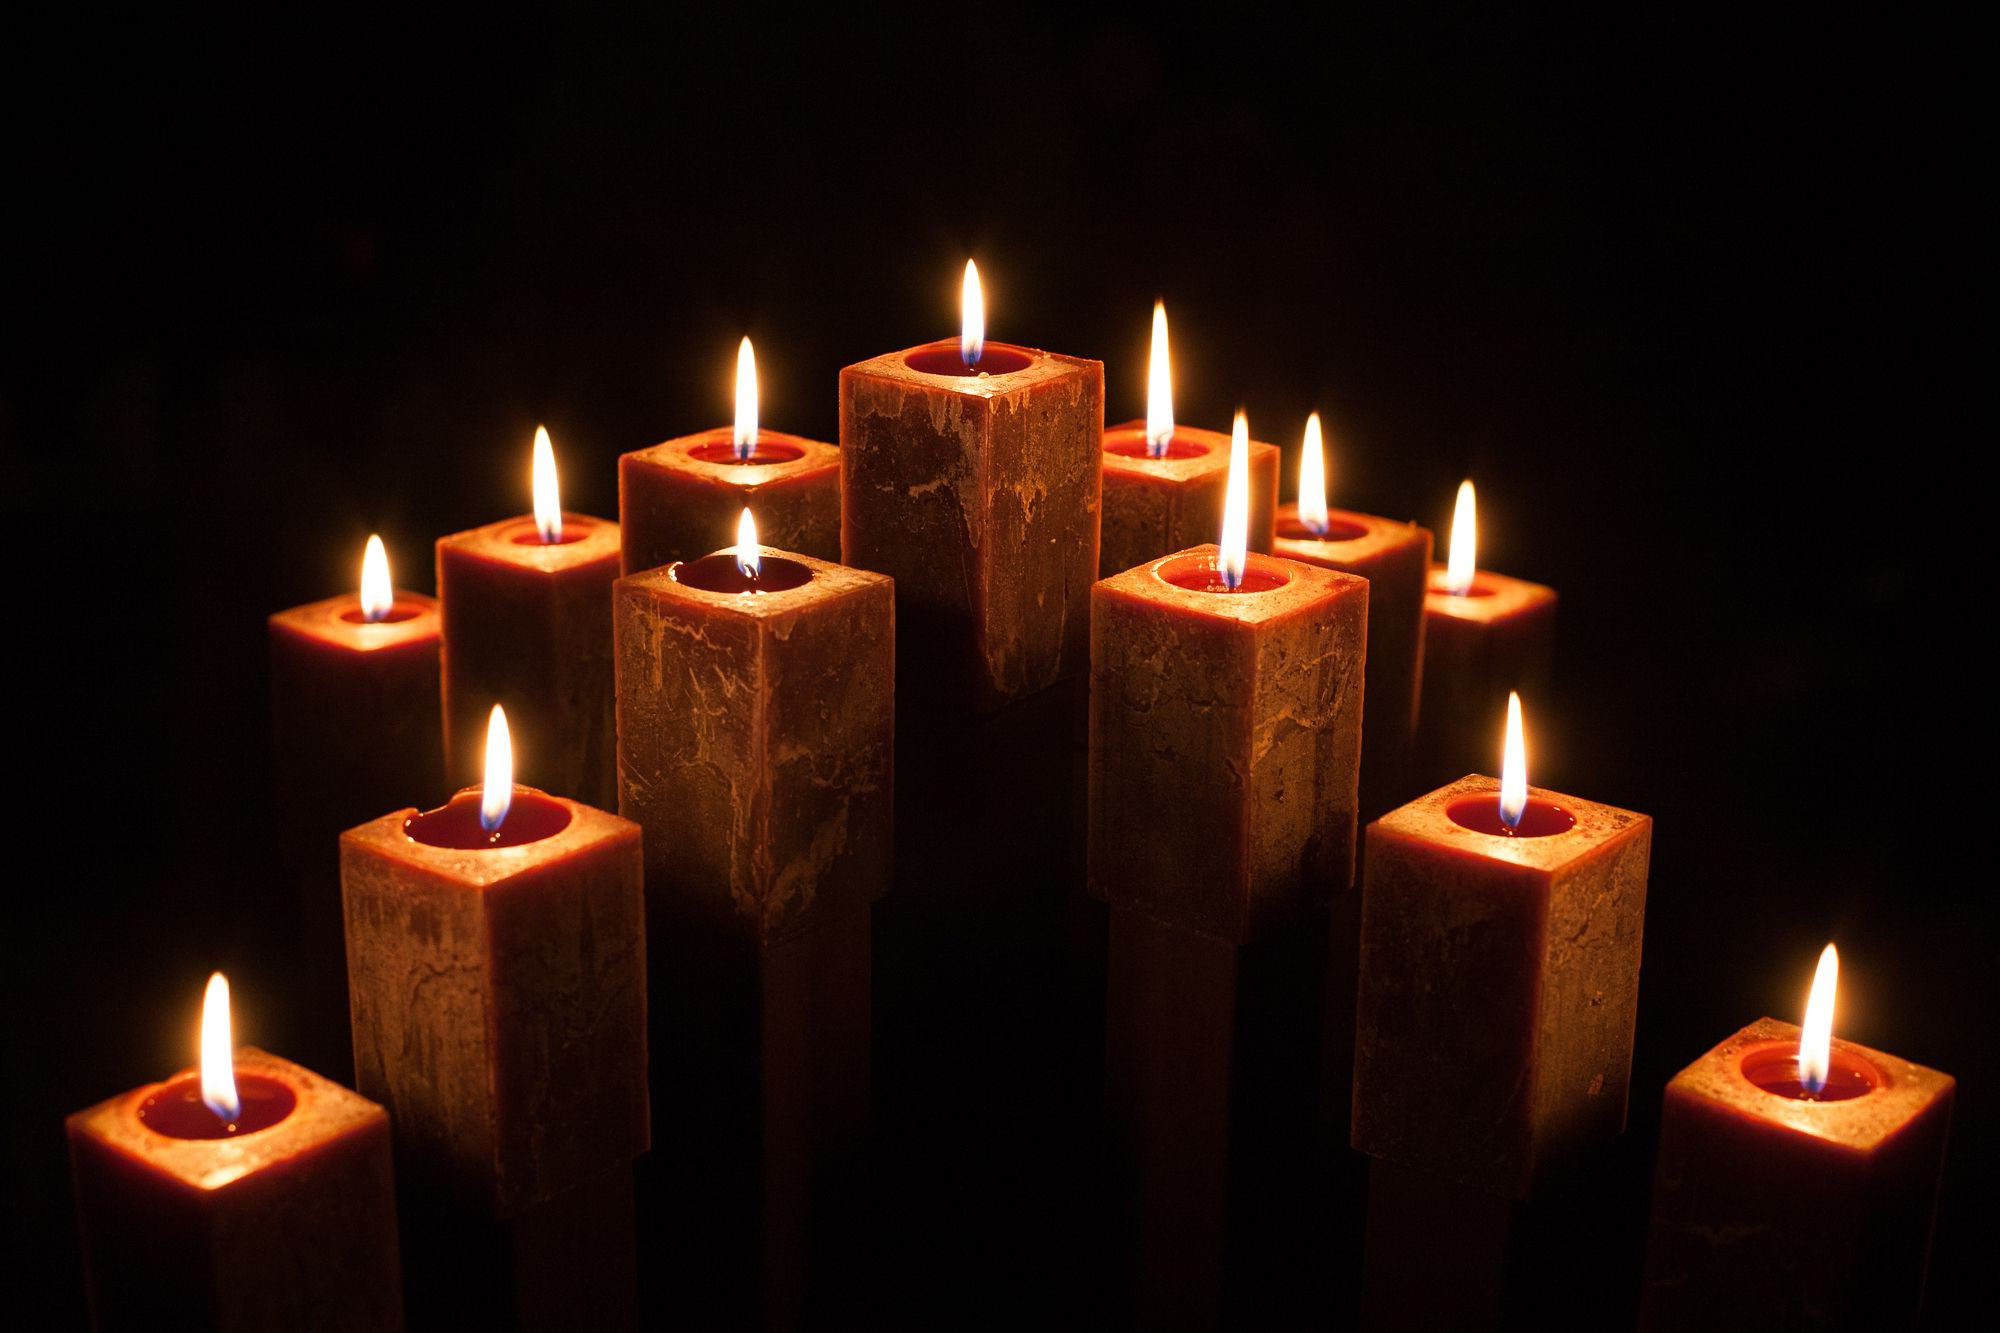 2000x1333 Candle Wallpapers Hd